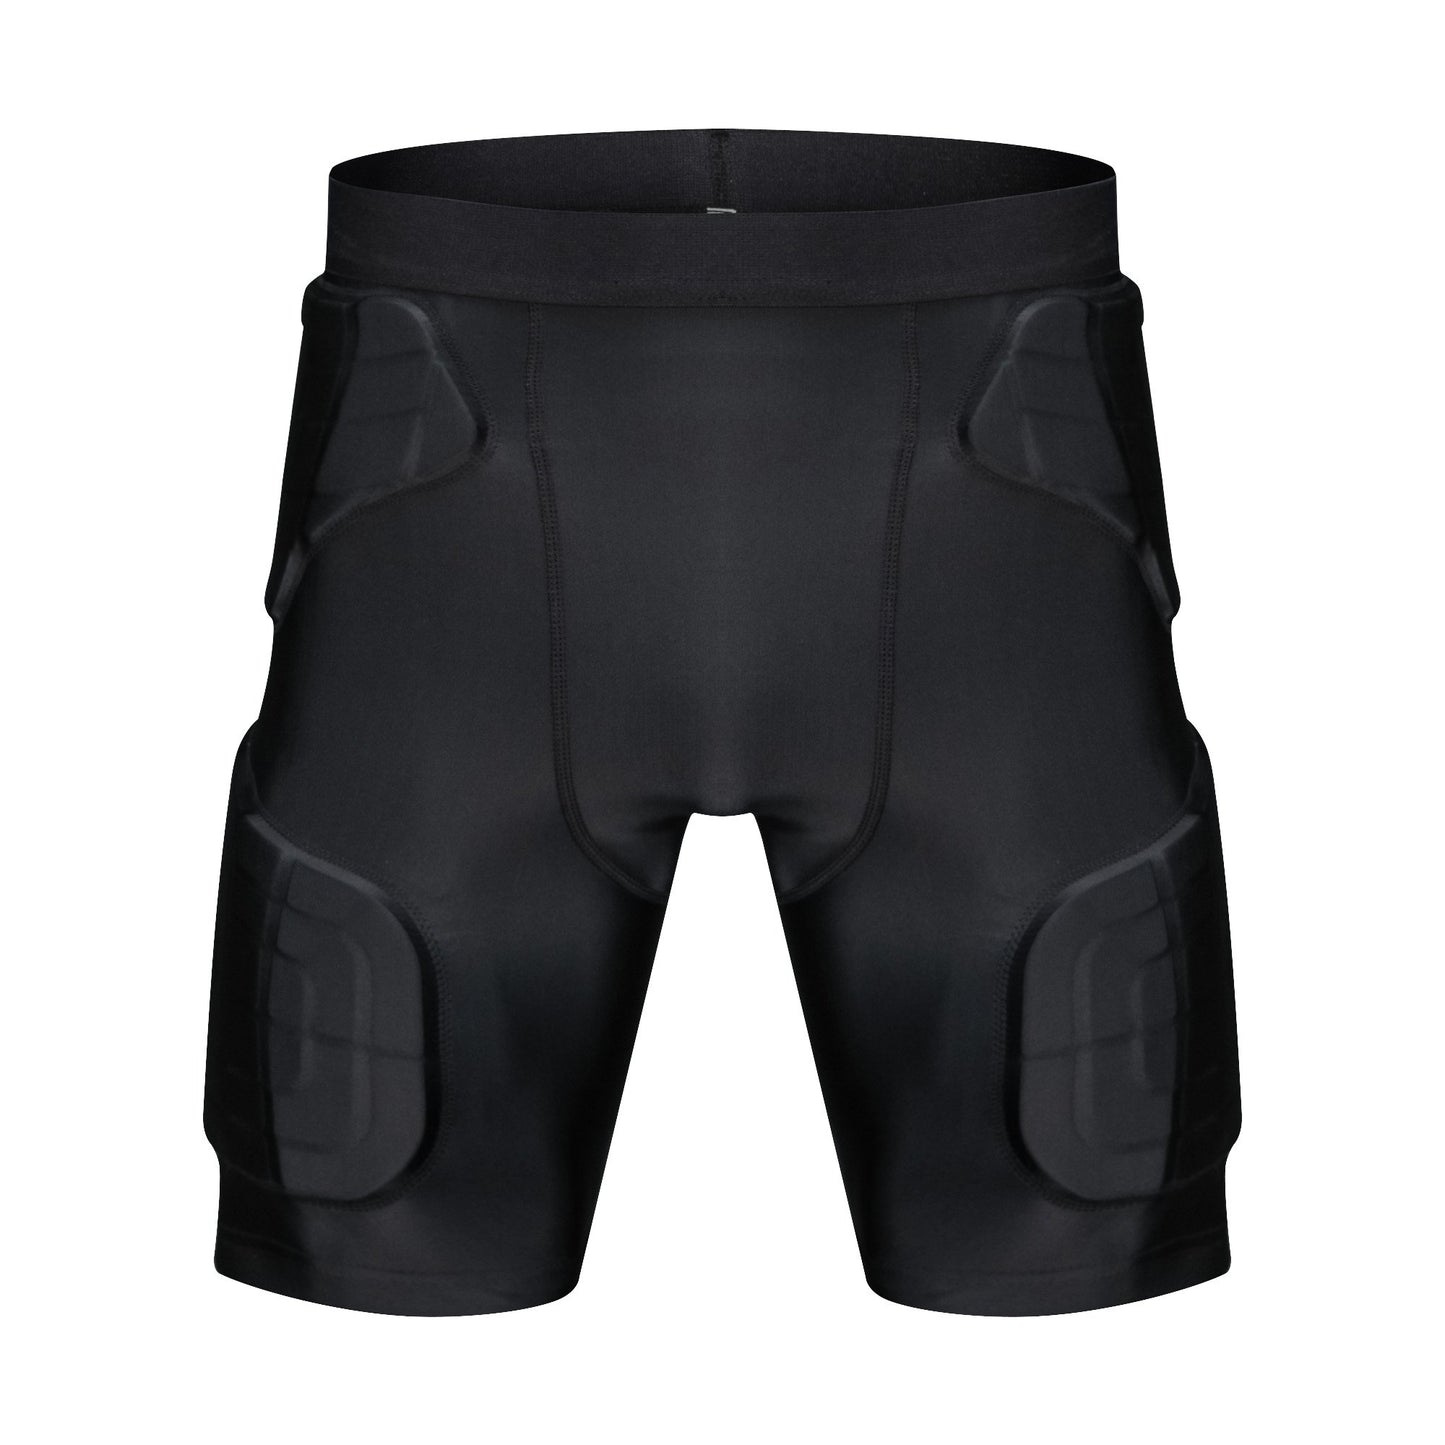 TUOY Padded Compression Shorts Padded Football Girdle Hip and Thigh Protector for Football Paintball Basketball Ice Skating Rugby Soccer Hockey and All Other Contact Sports